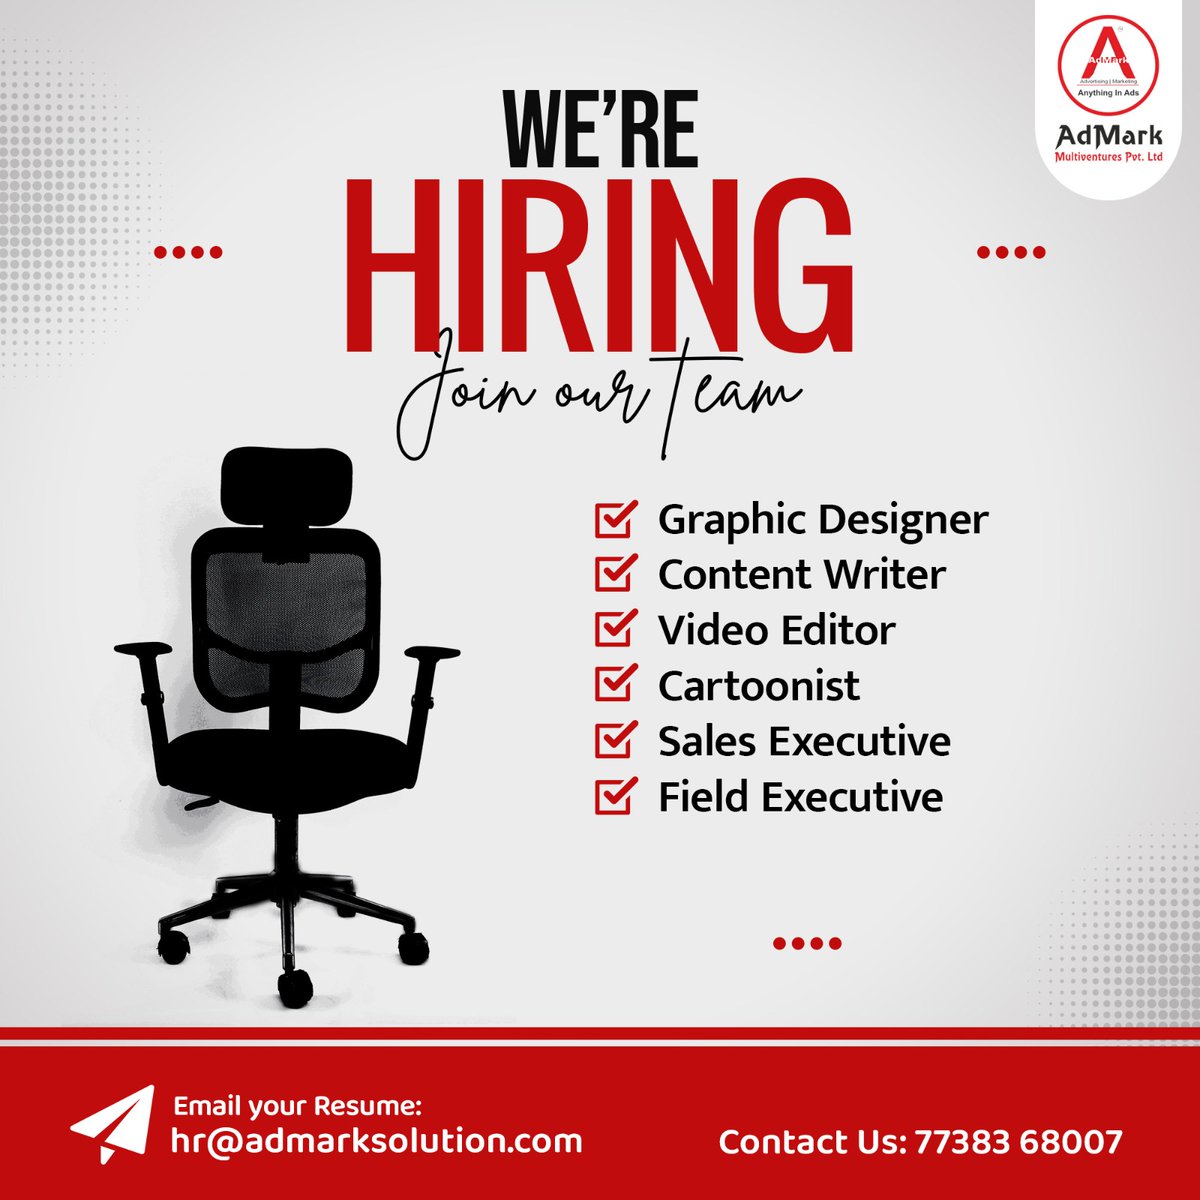 ‘We Want You!’ 📷
Our company is looking for a highly talented position
to join our team.
Interested candidates kindly CONTACT Us: 7738368007
Email ID: hr@admarksolution.com
#Hiring #Corporate #vacancy #vacancy2023
 #DigitalMarketing #digitaladmark #hiringpost #jobvacancy #thane